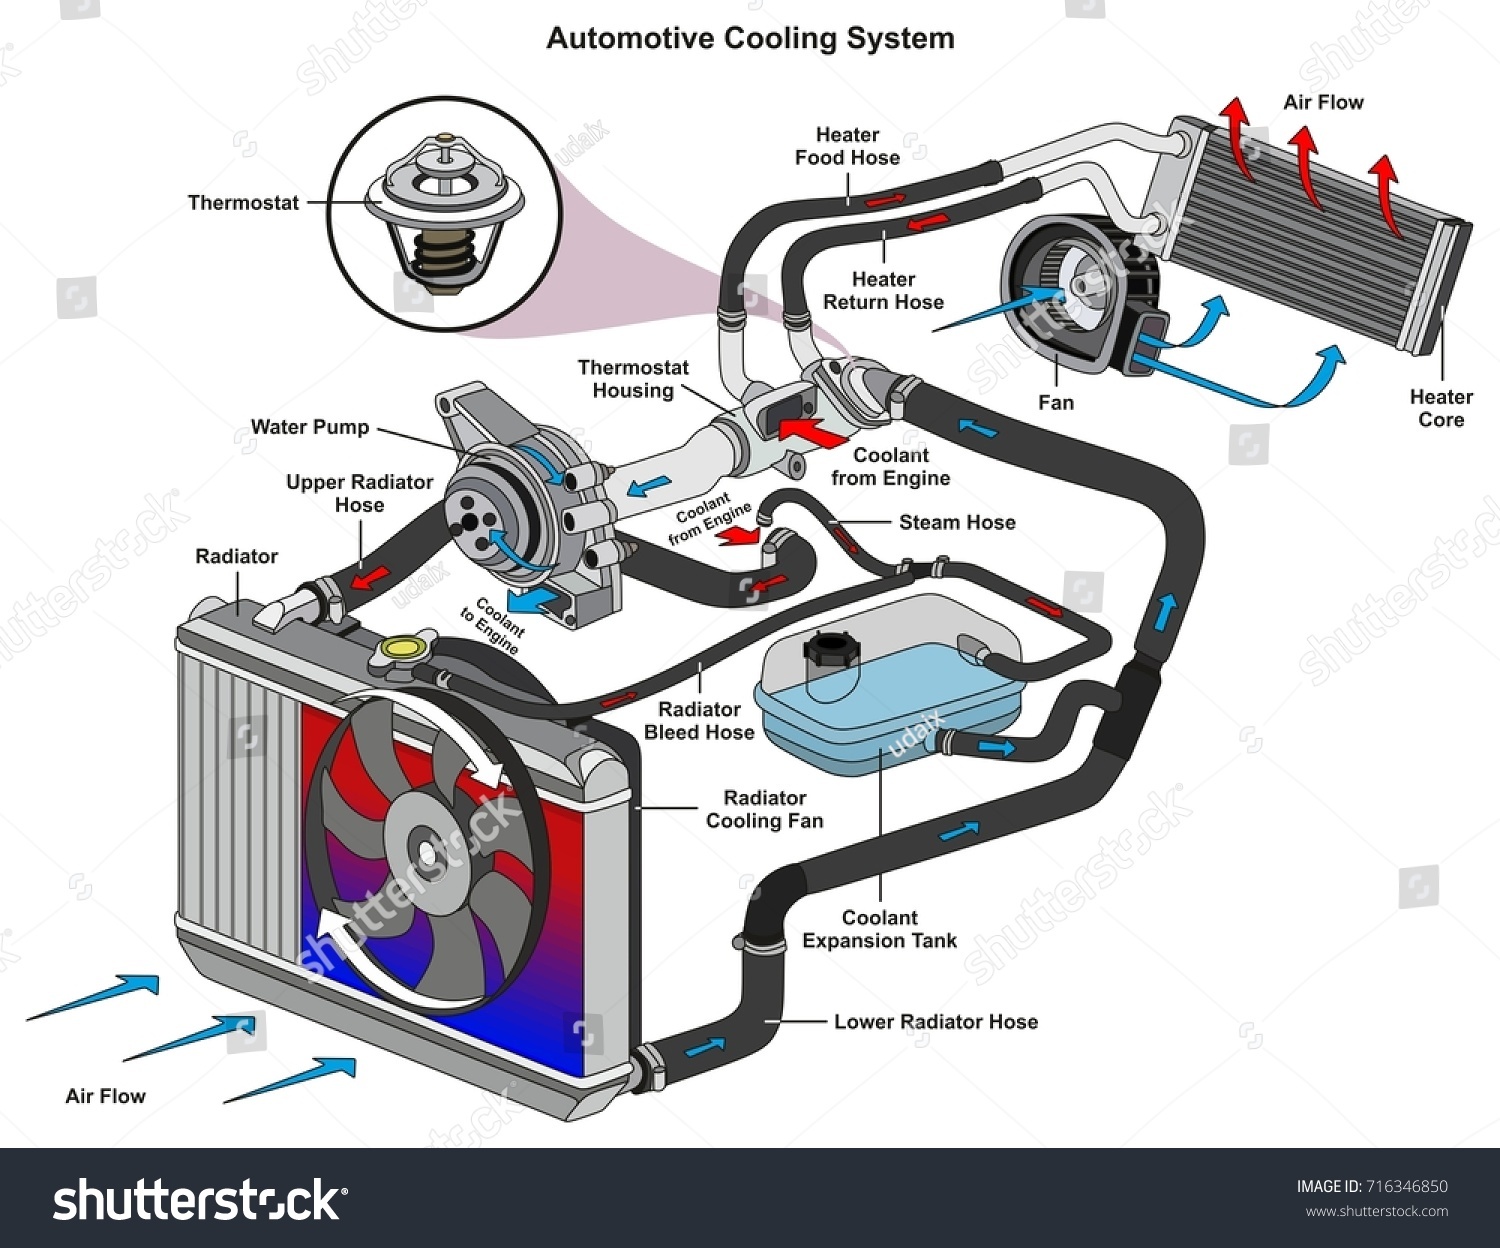 Automotive Cooling System Infographic Diagram Showing Stock